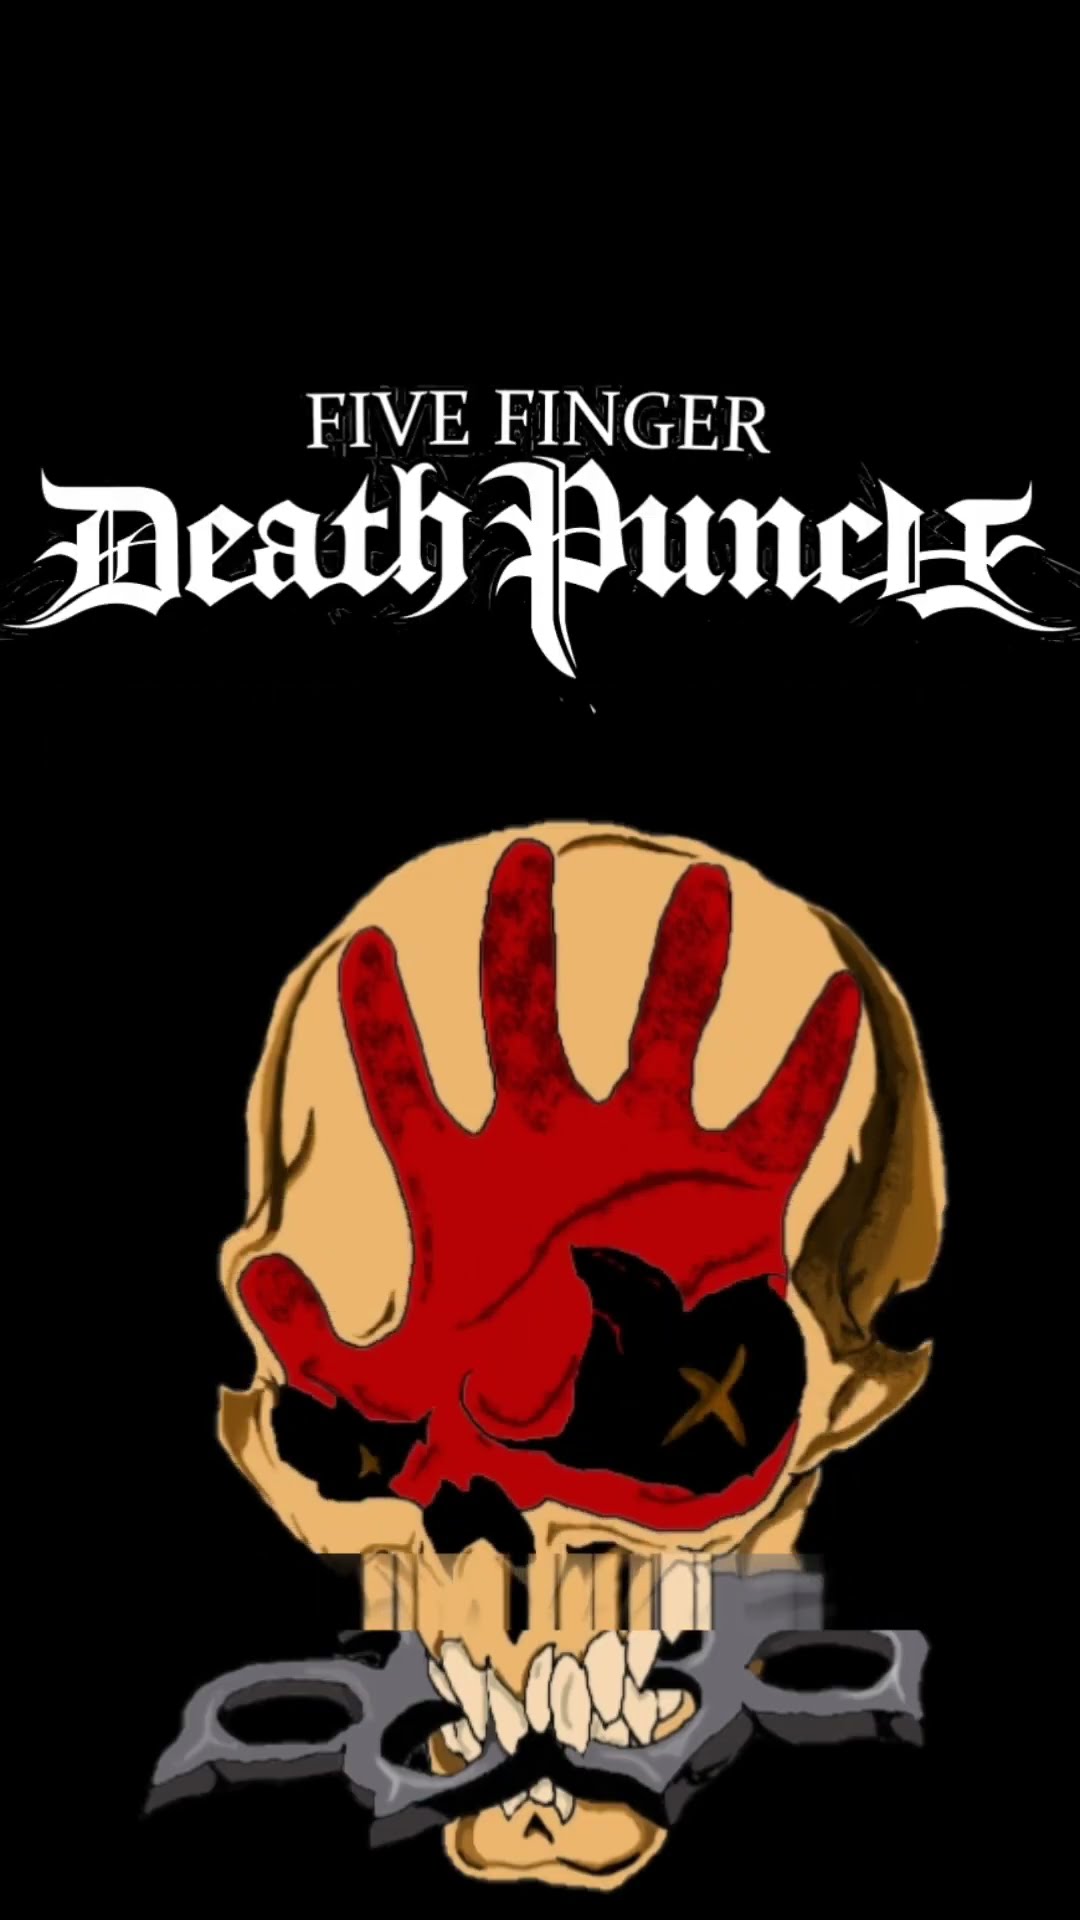 Five Finger Death Punch "Welcome to the Circus" #shorts #metal #metalmusic #music